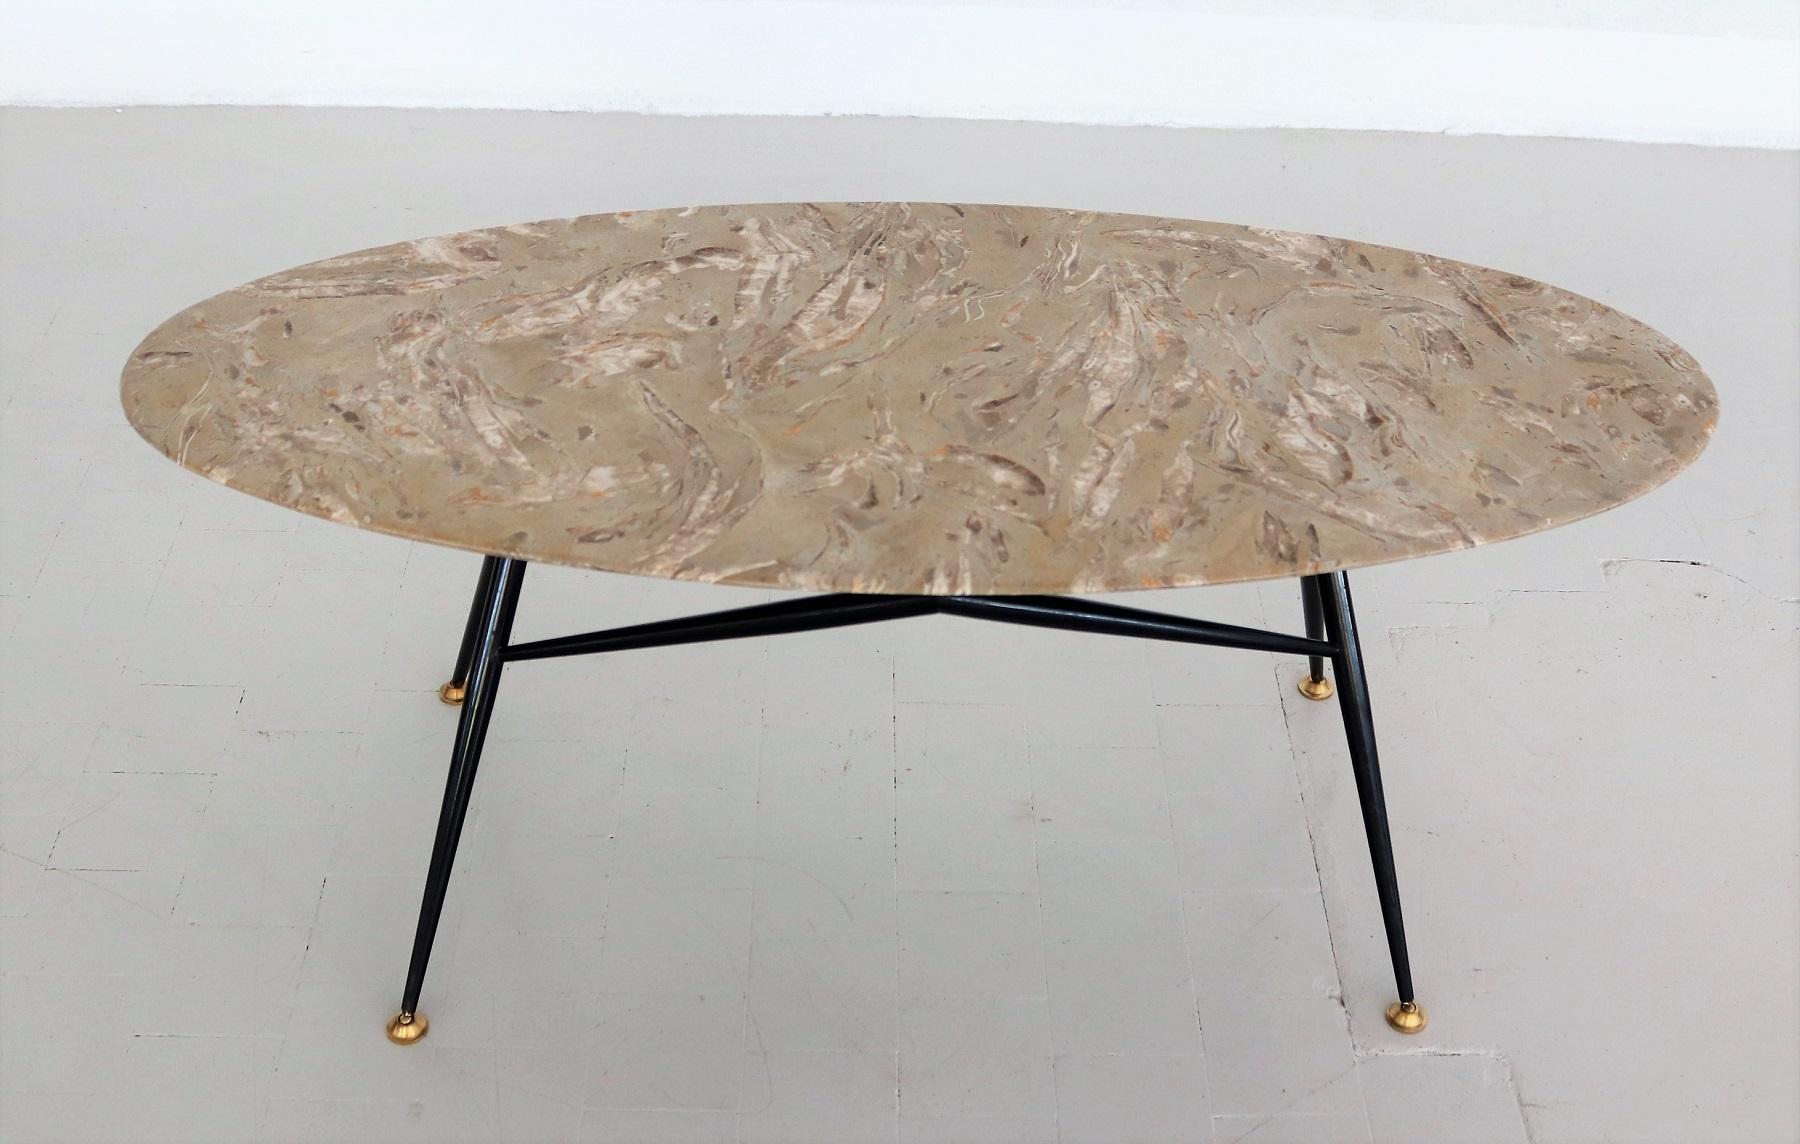 Beautiful particular coffee table in oval shape with gorgeous marble top in sand - beige - taupe color with orange inclusions and metallic legs with adjustable brass tips.
Made in Italy during the 1950s.
This marble top has a beautiful natural